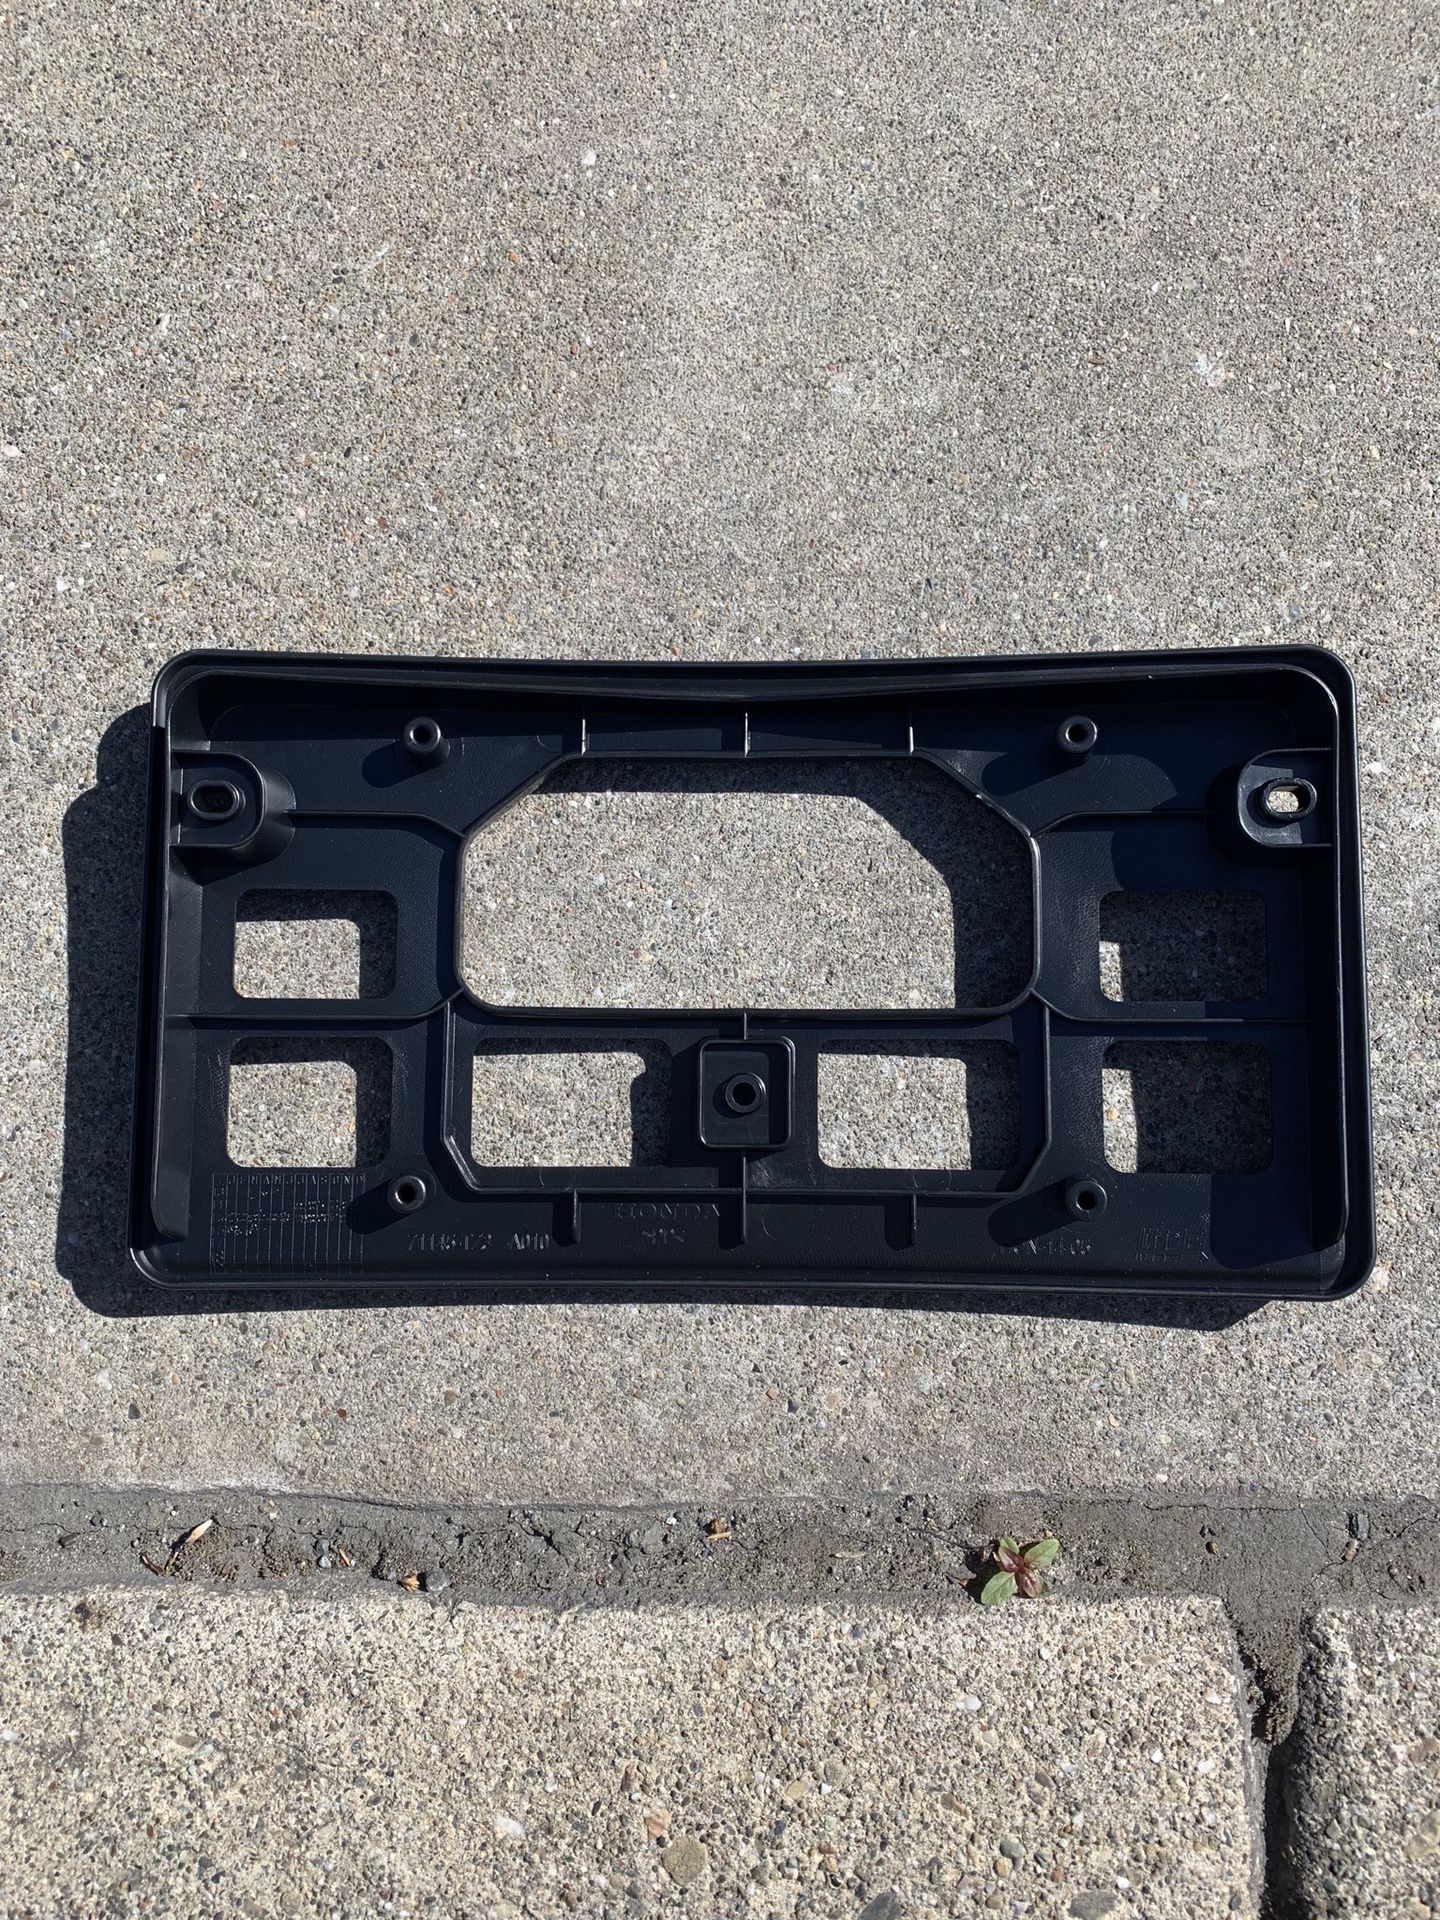 BRAND NEW 2014-2019 Acura TLX Front License Plate Holder